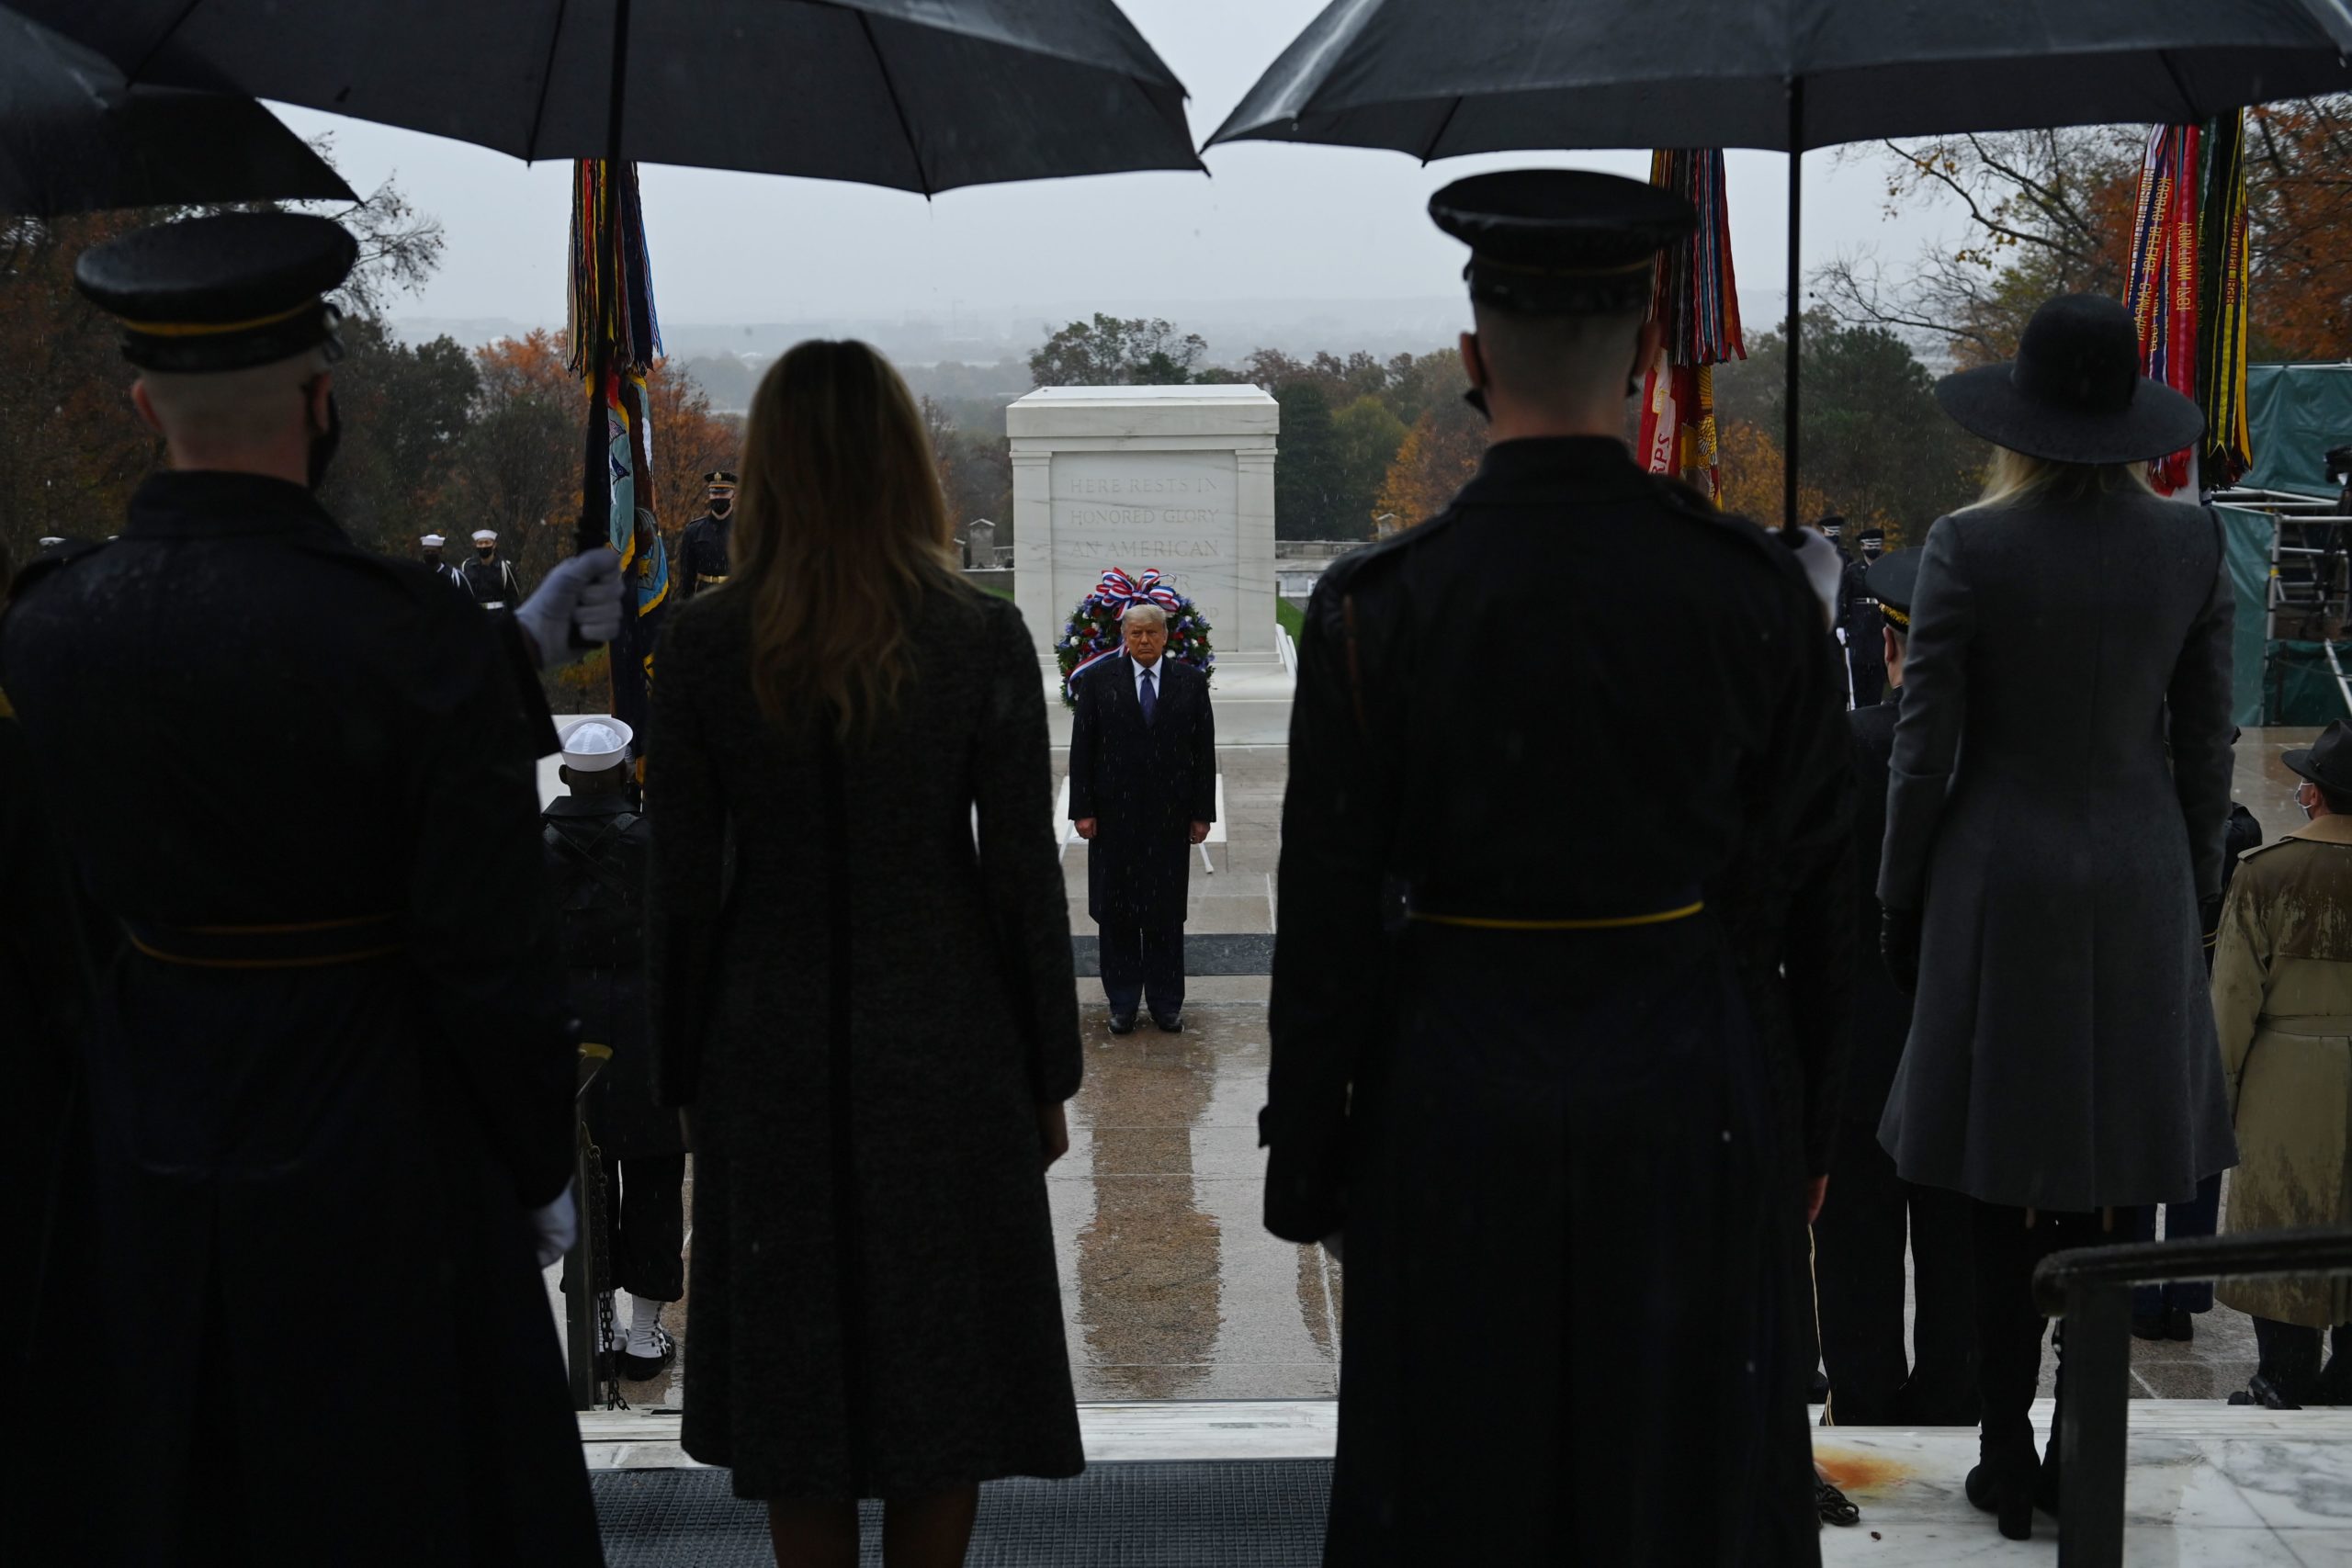 US President Donald Trump(C) attends a "National Day of Observance" wreath laying ceremony on November 11, 2020 at Arlington National Cemetery in Arlington, Virginia. - US President Donald Trump made his first official post-election appearance Wednesday for what should be a moment of national unity to mark Veteran's Day, now marred by his refusal to acknowledge Joe Biden's win. The president visited Arlington National Cemetery, four days after US media projected his Democratic rival would take the White House. (Photo by BRENDAN SMIALOWSKI/AFP via Getty Images)